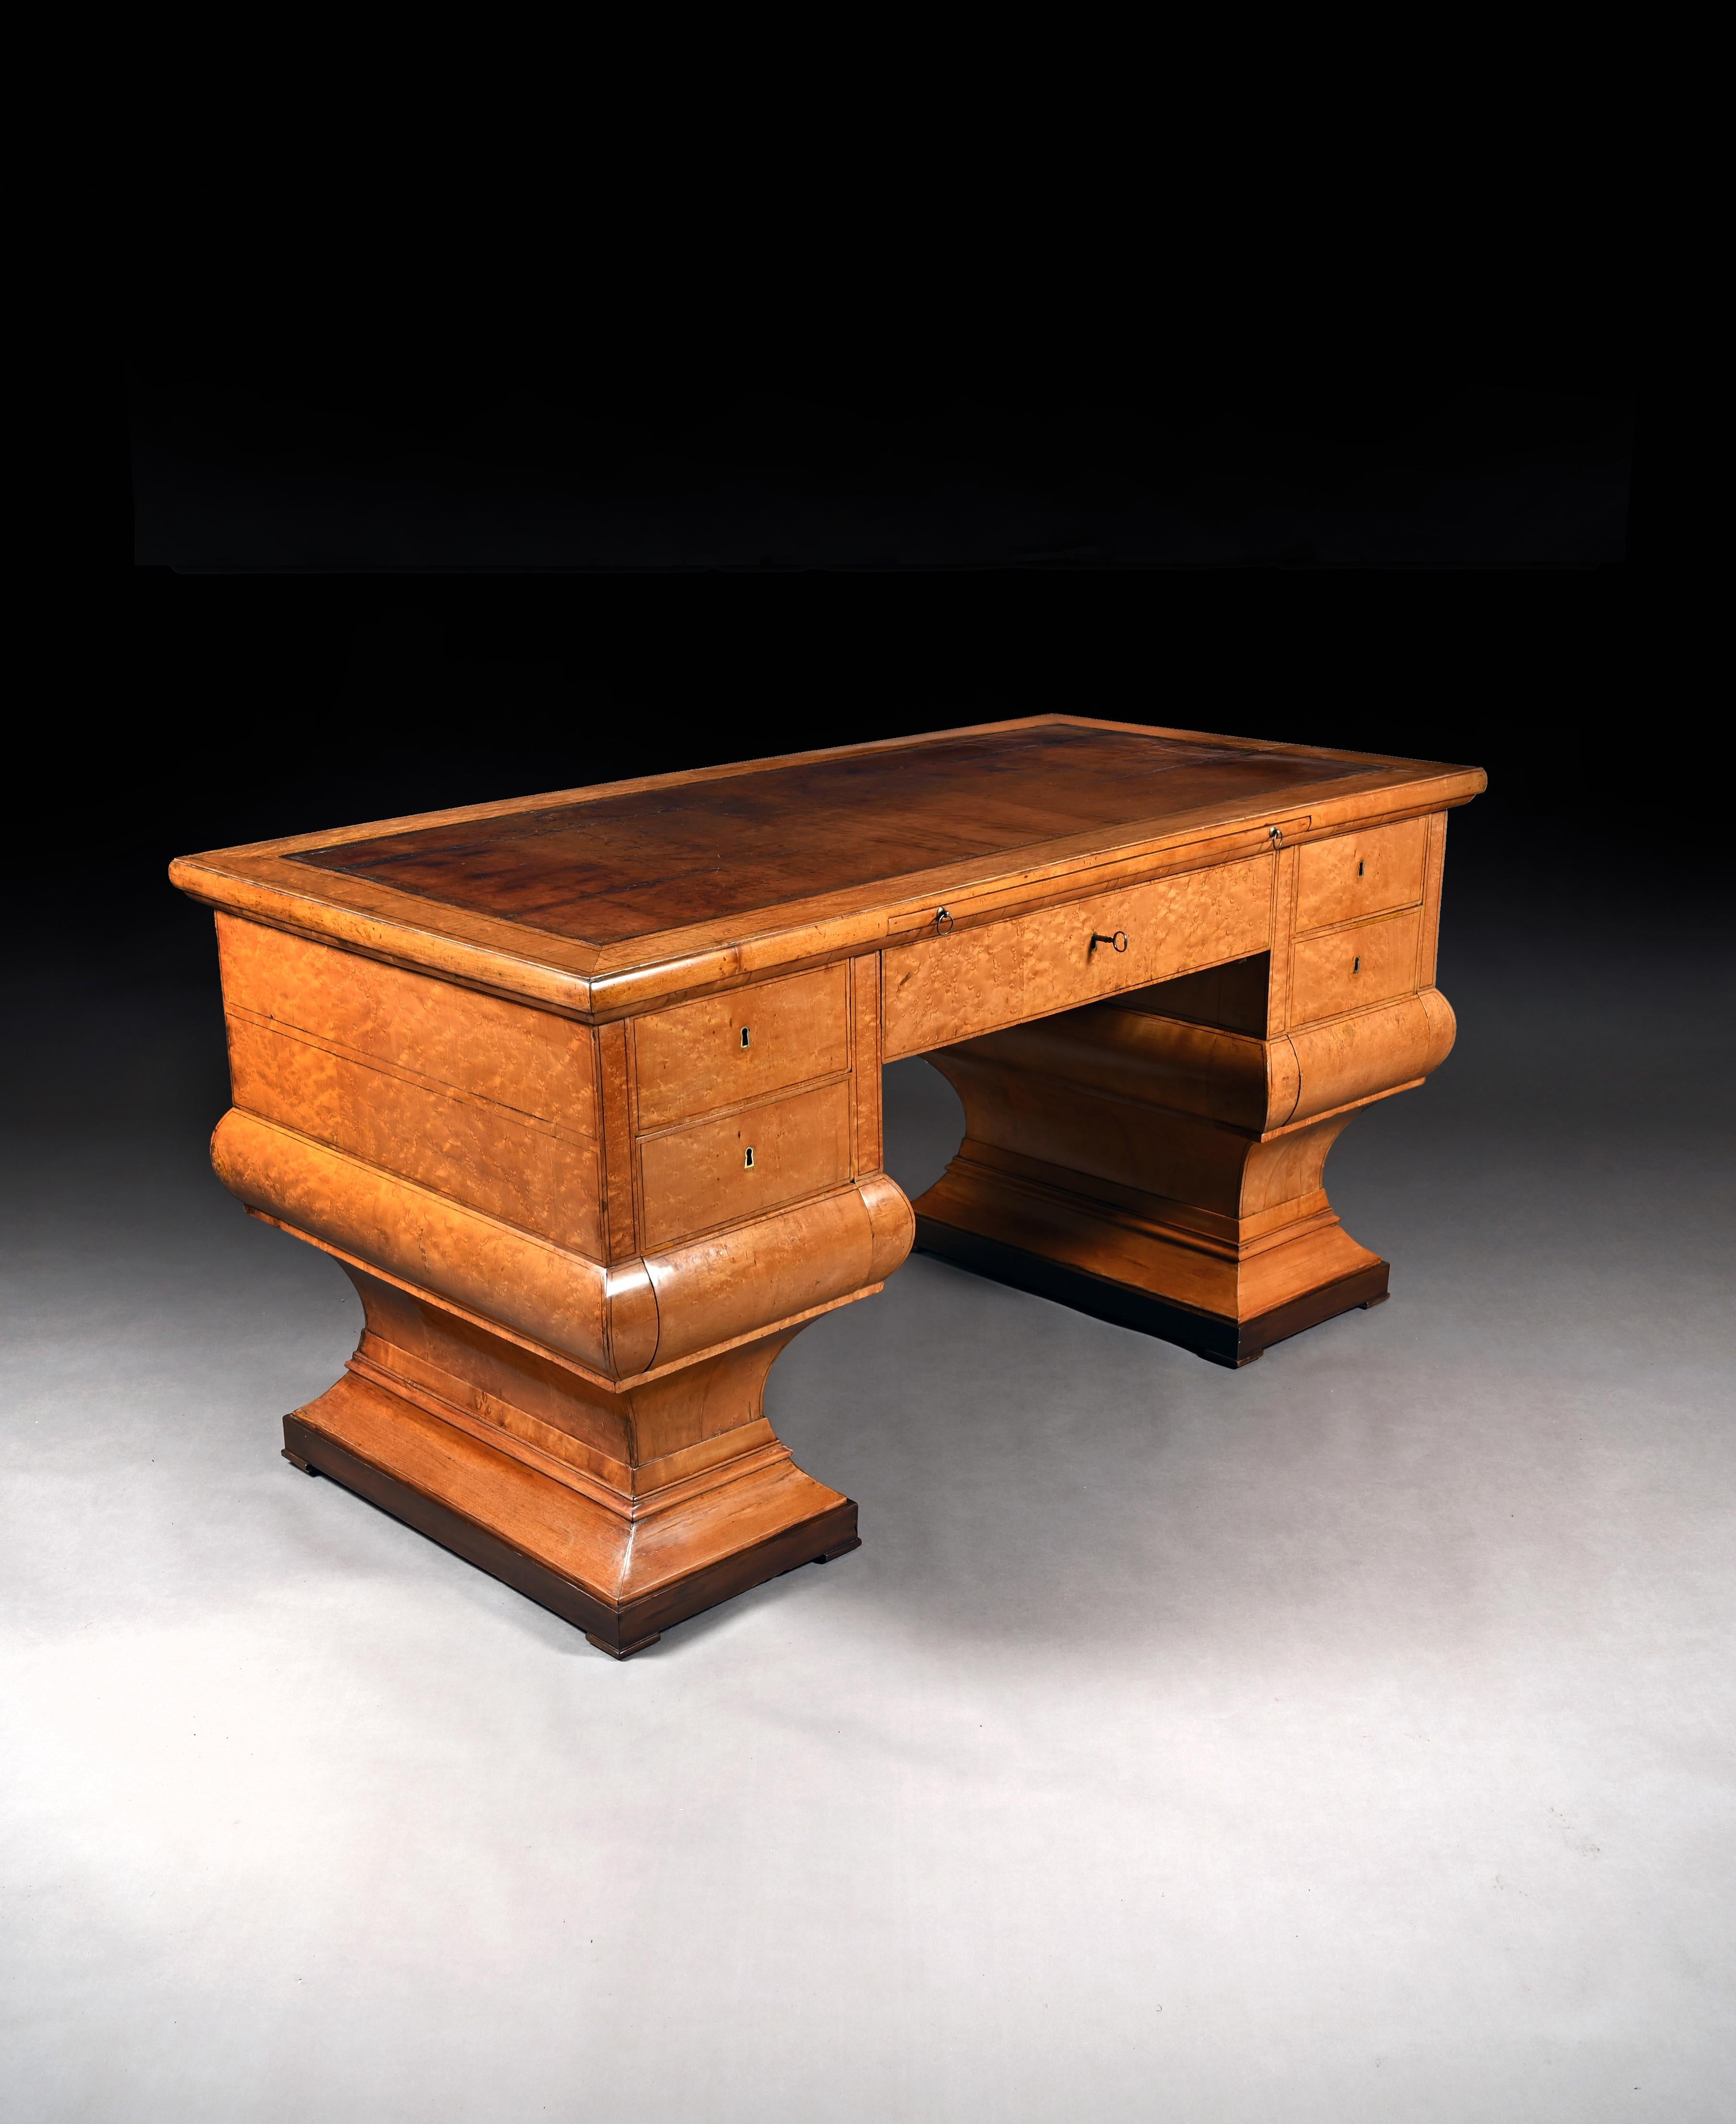 An exquisite freestanding figured maple wood and ebony desk of neoclassical form in the manner of Josef Danhauser. 

Origin: Austrian, Vienna, circa 1820, Biedermeier period.

Provenance: Private European collection, originally purchased from